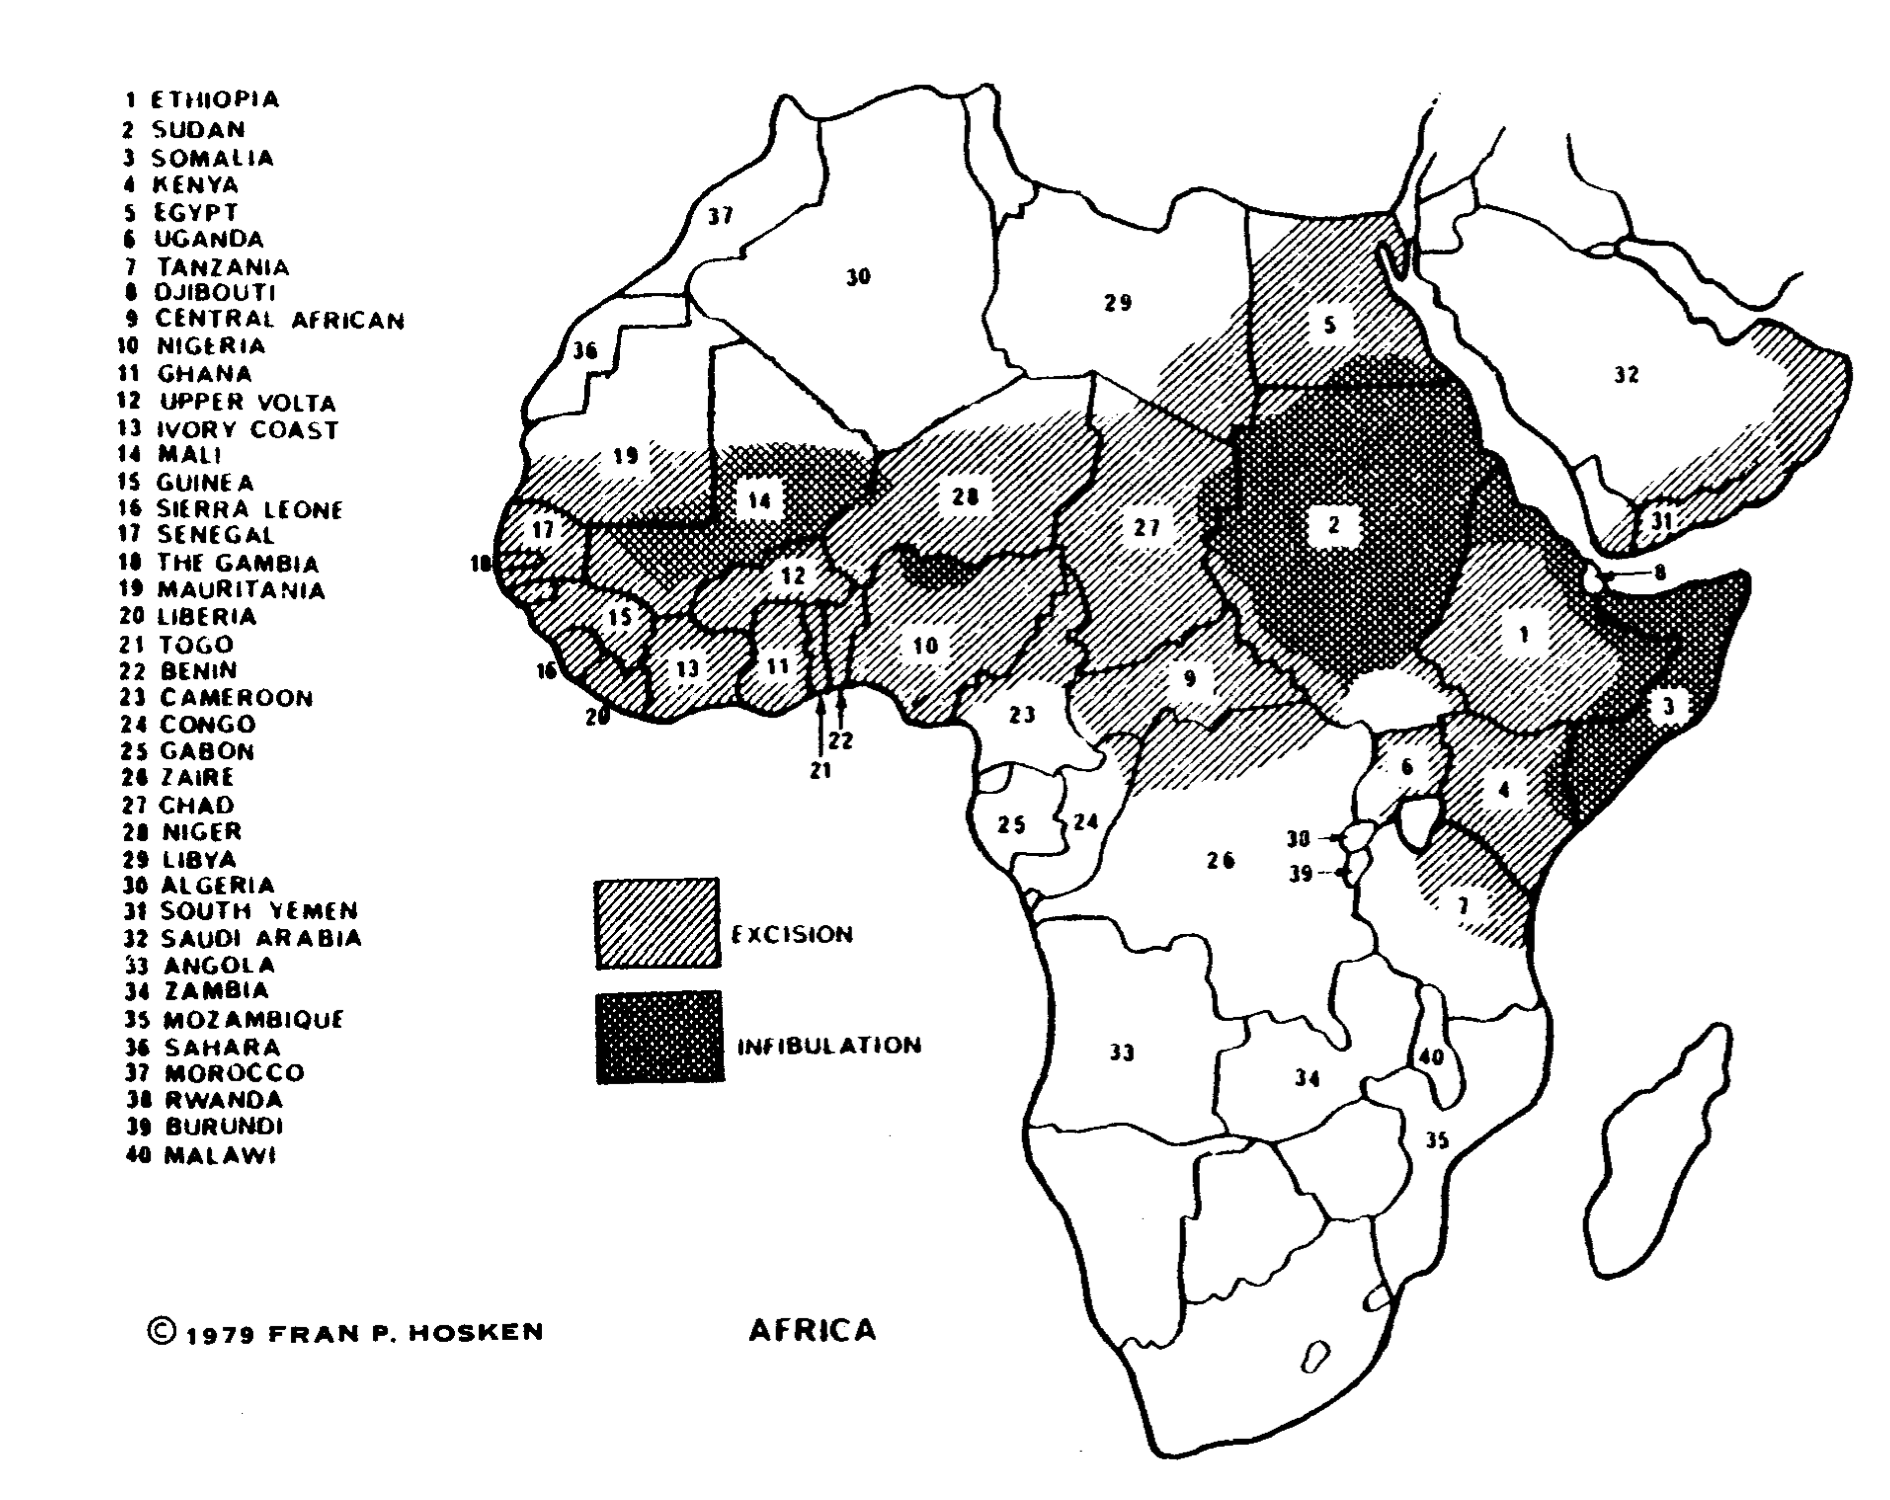 Map of African continent labeling countries that practice Excision and/or Infibulation